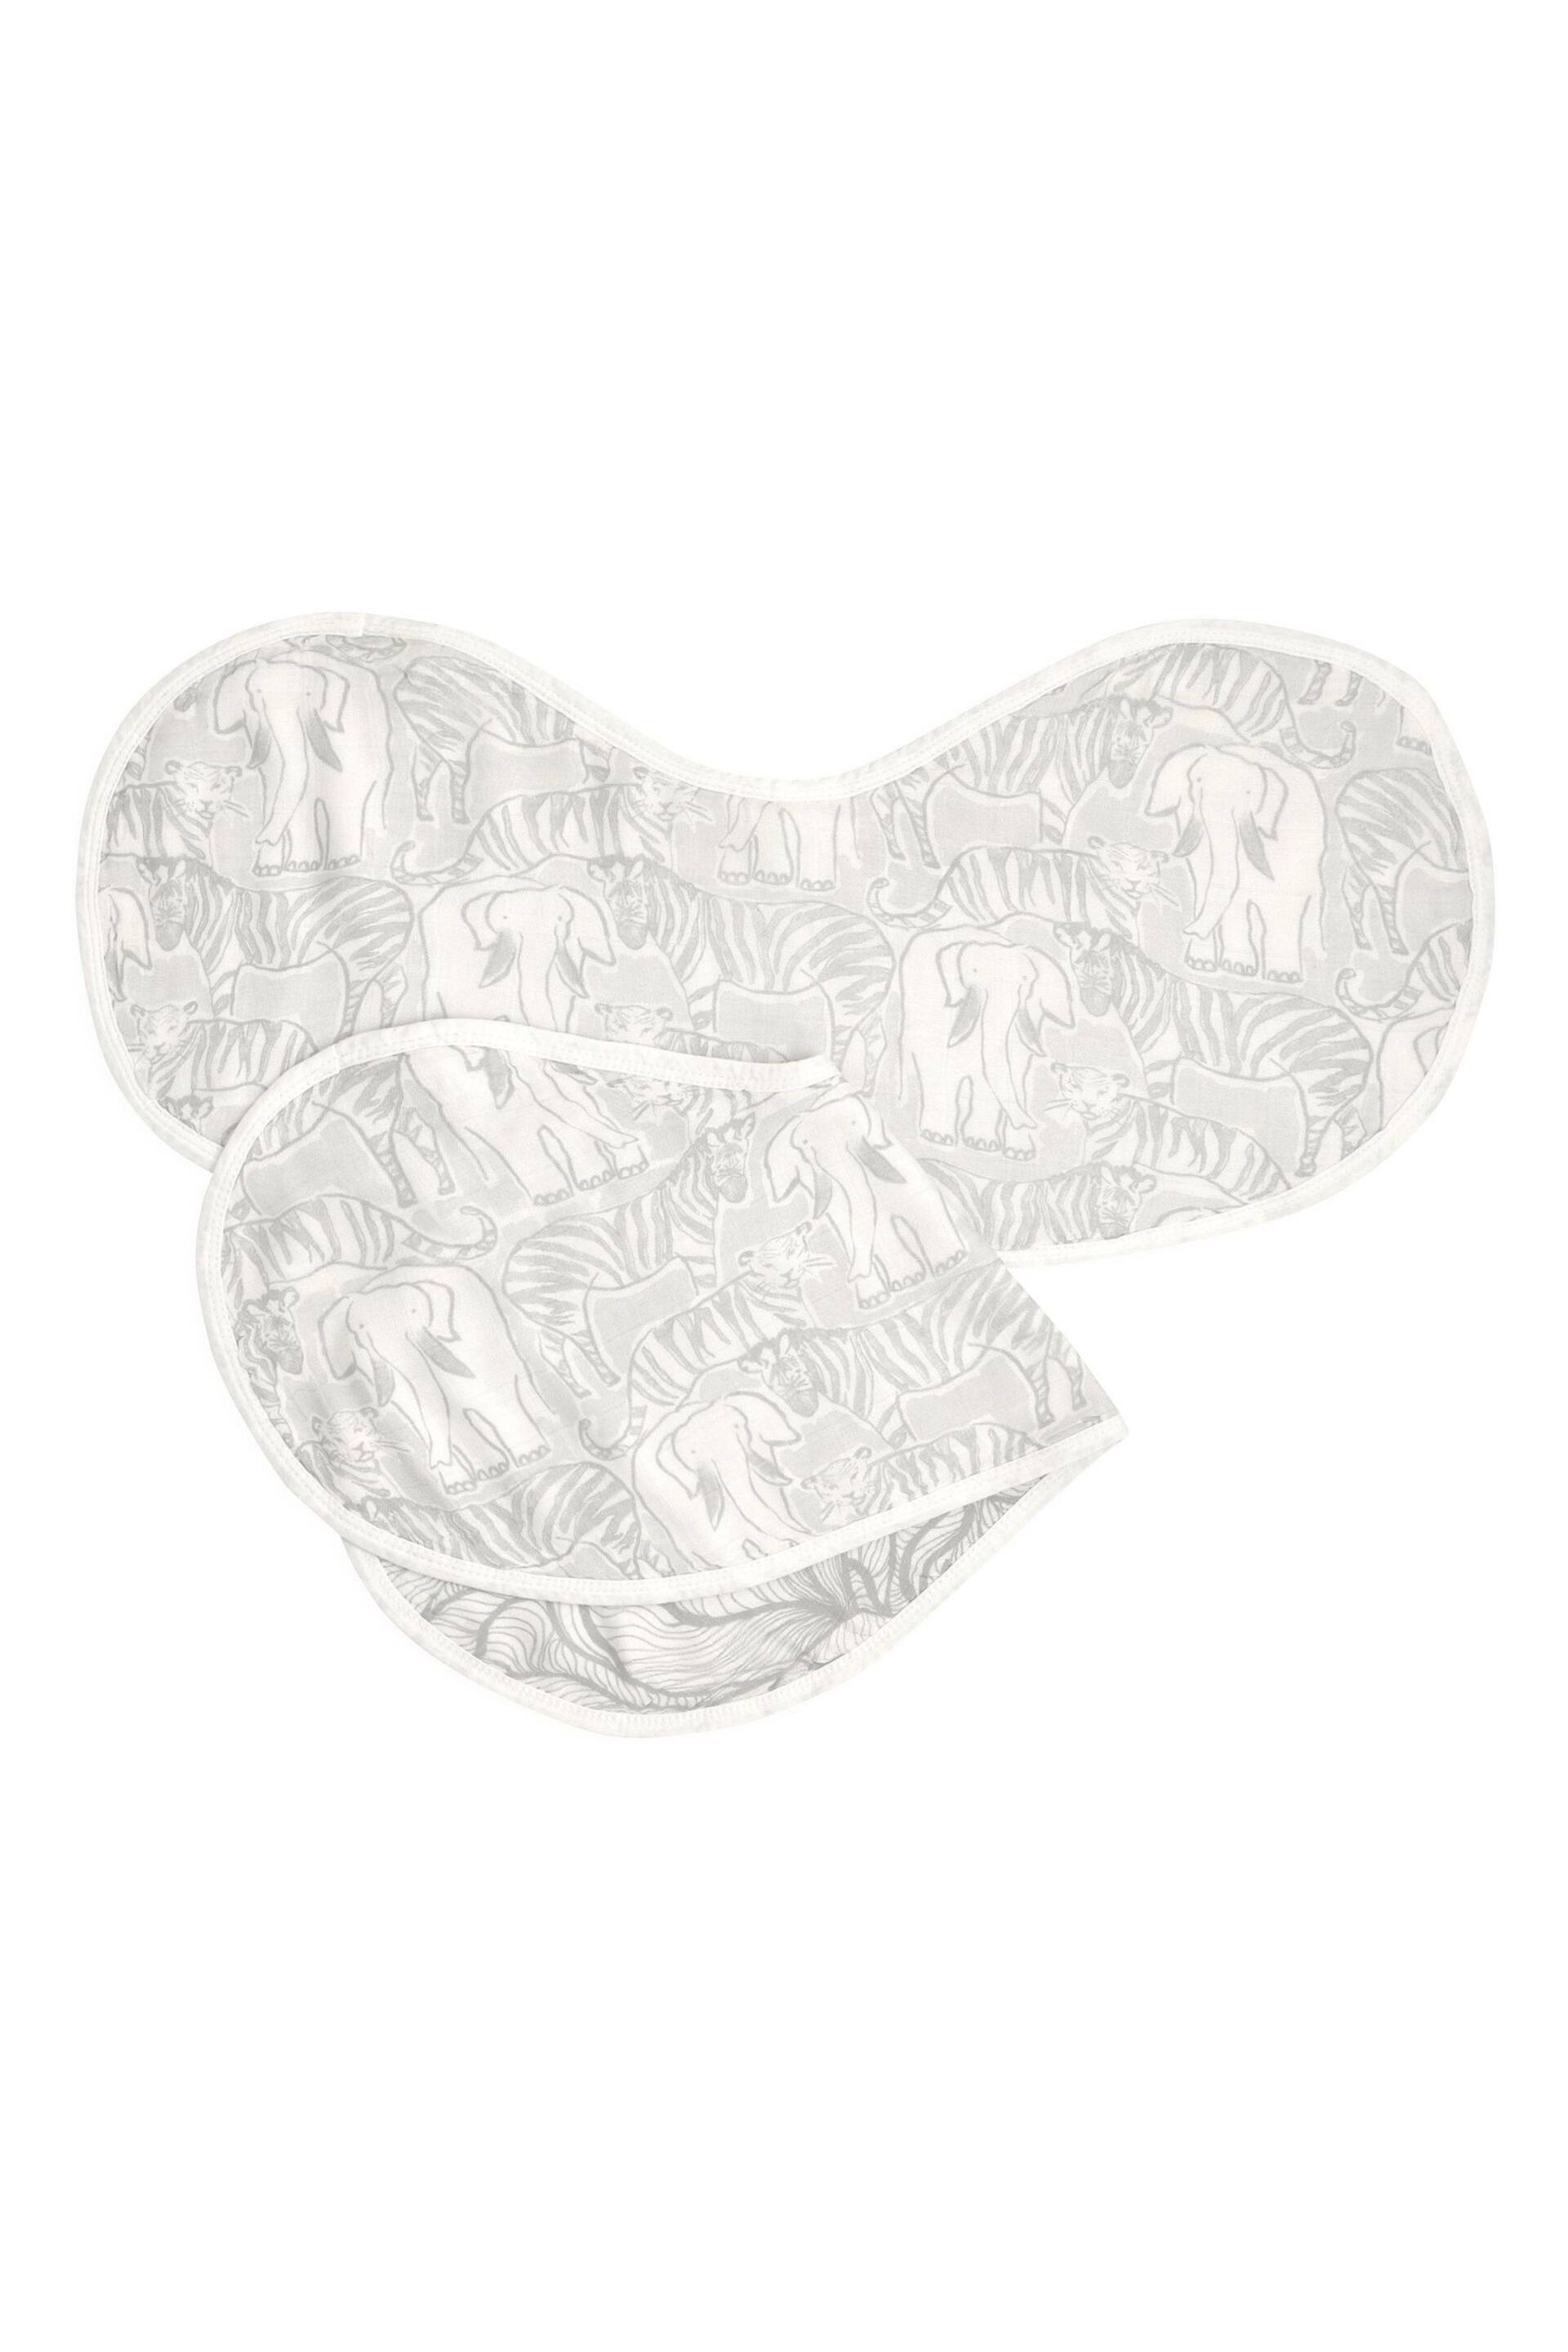 aden + anais Burpy Bibs Silky Soft Culture Club 2 Pack - Image 2 of 4